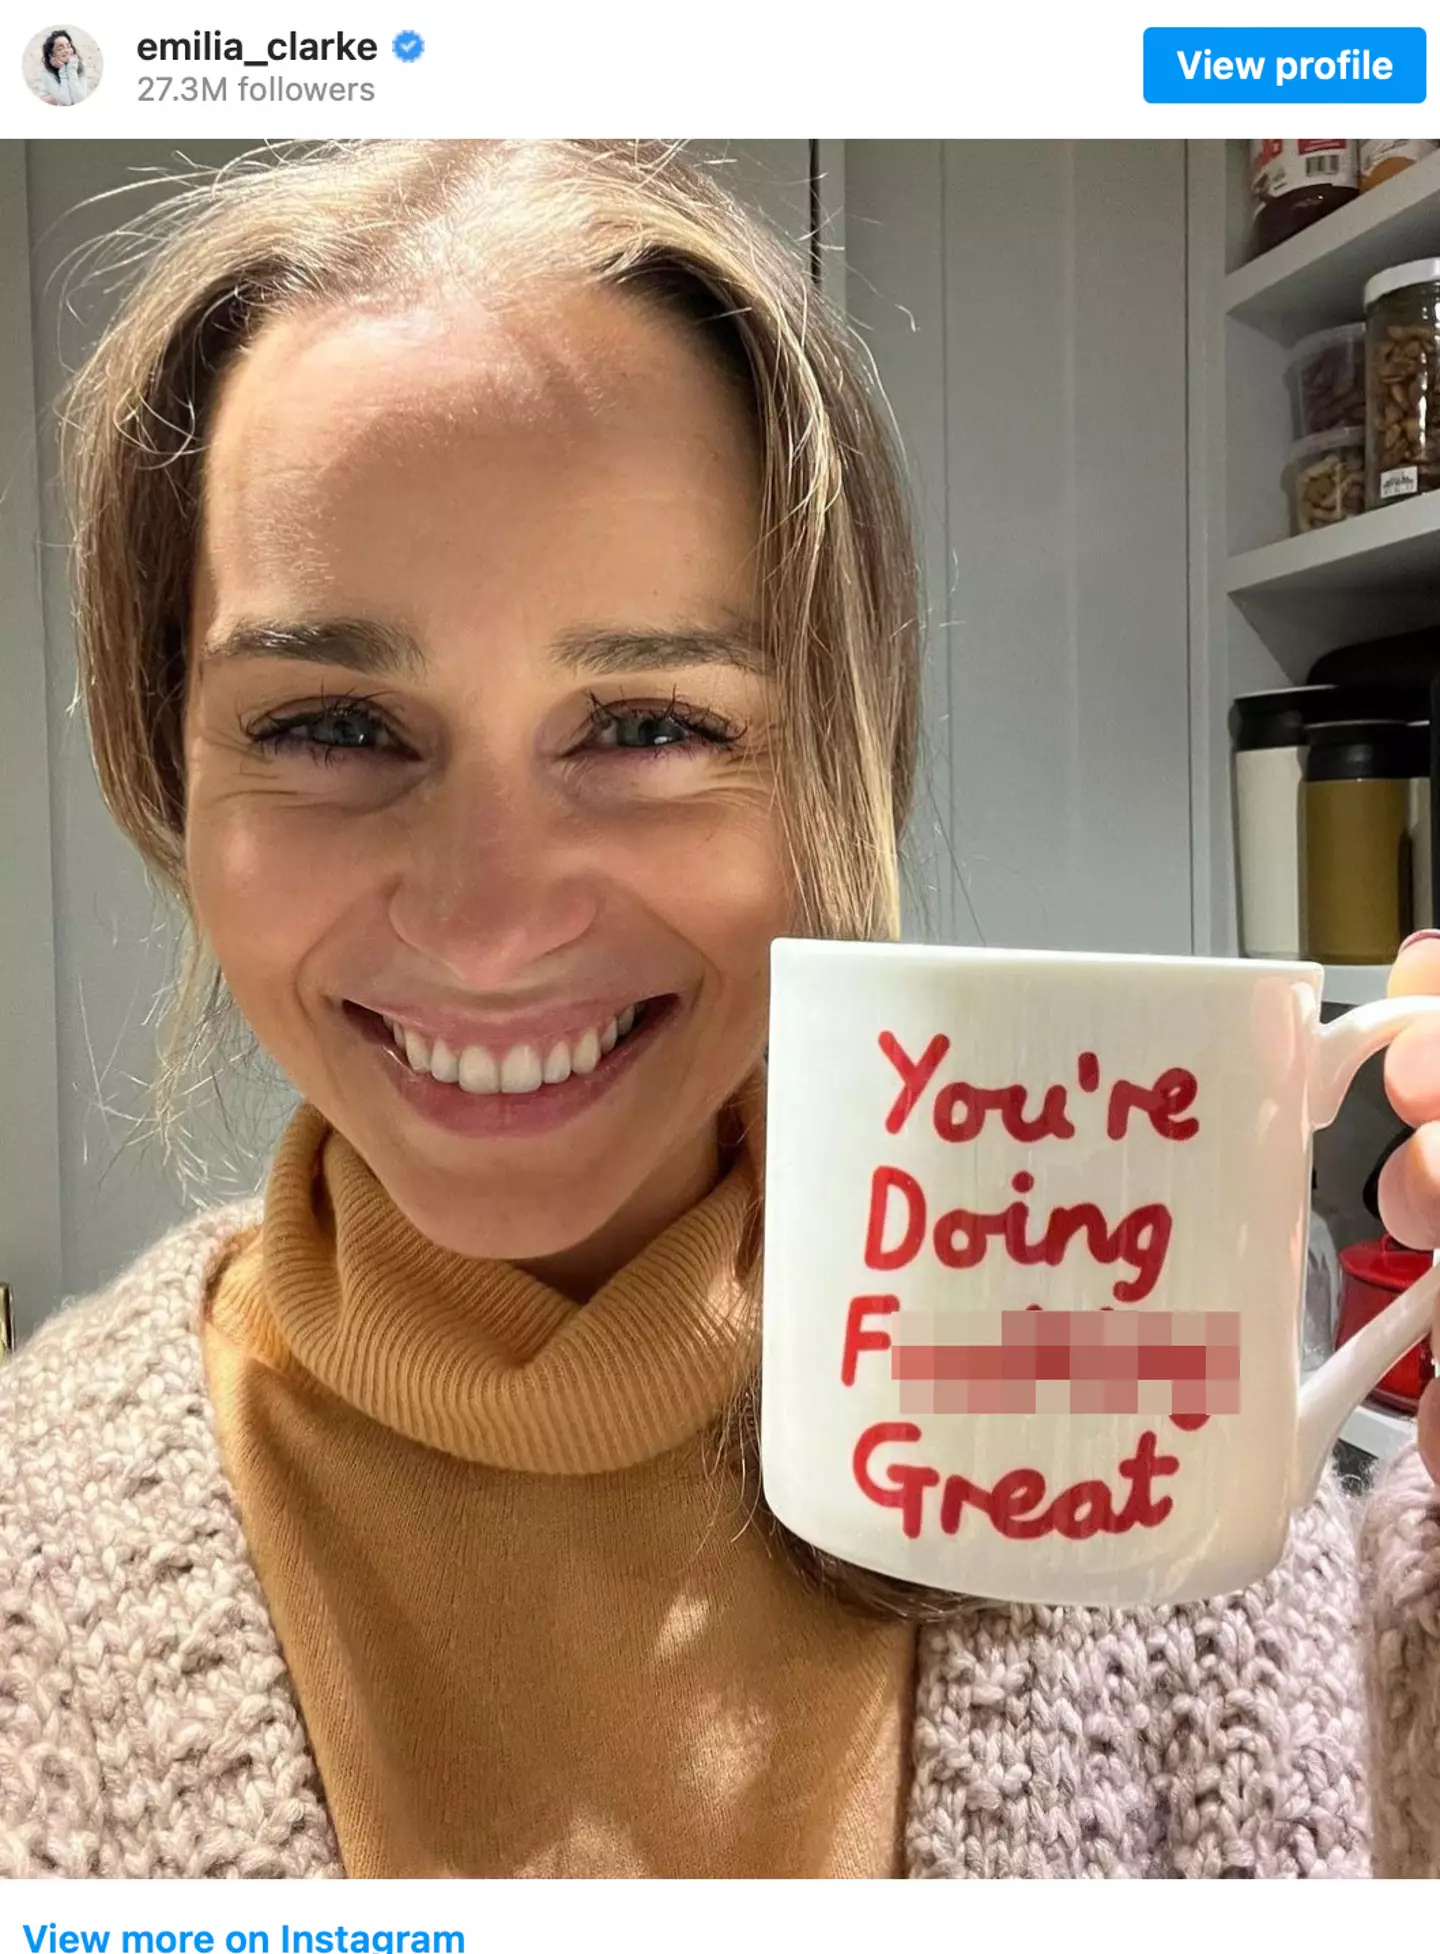 Emilia Clarke shared a sweet selfie, but was sadly targeted by trolls.